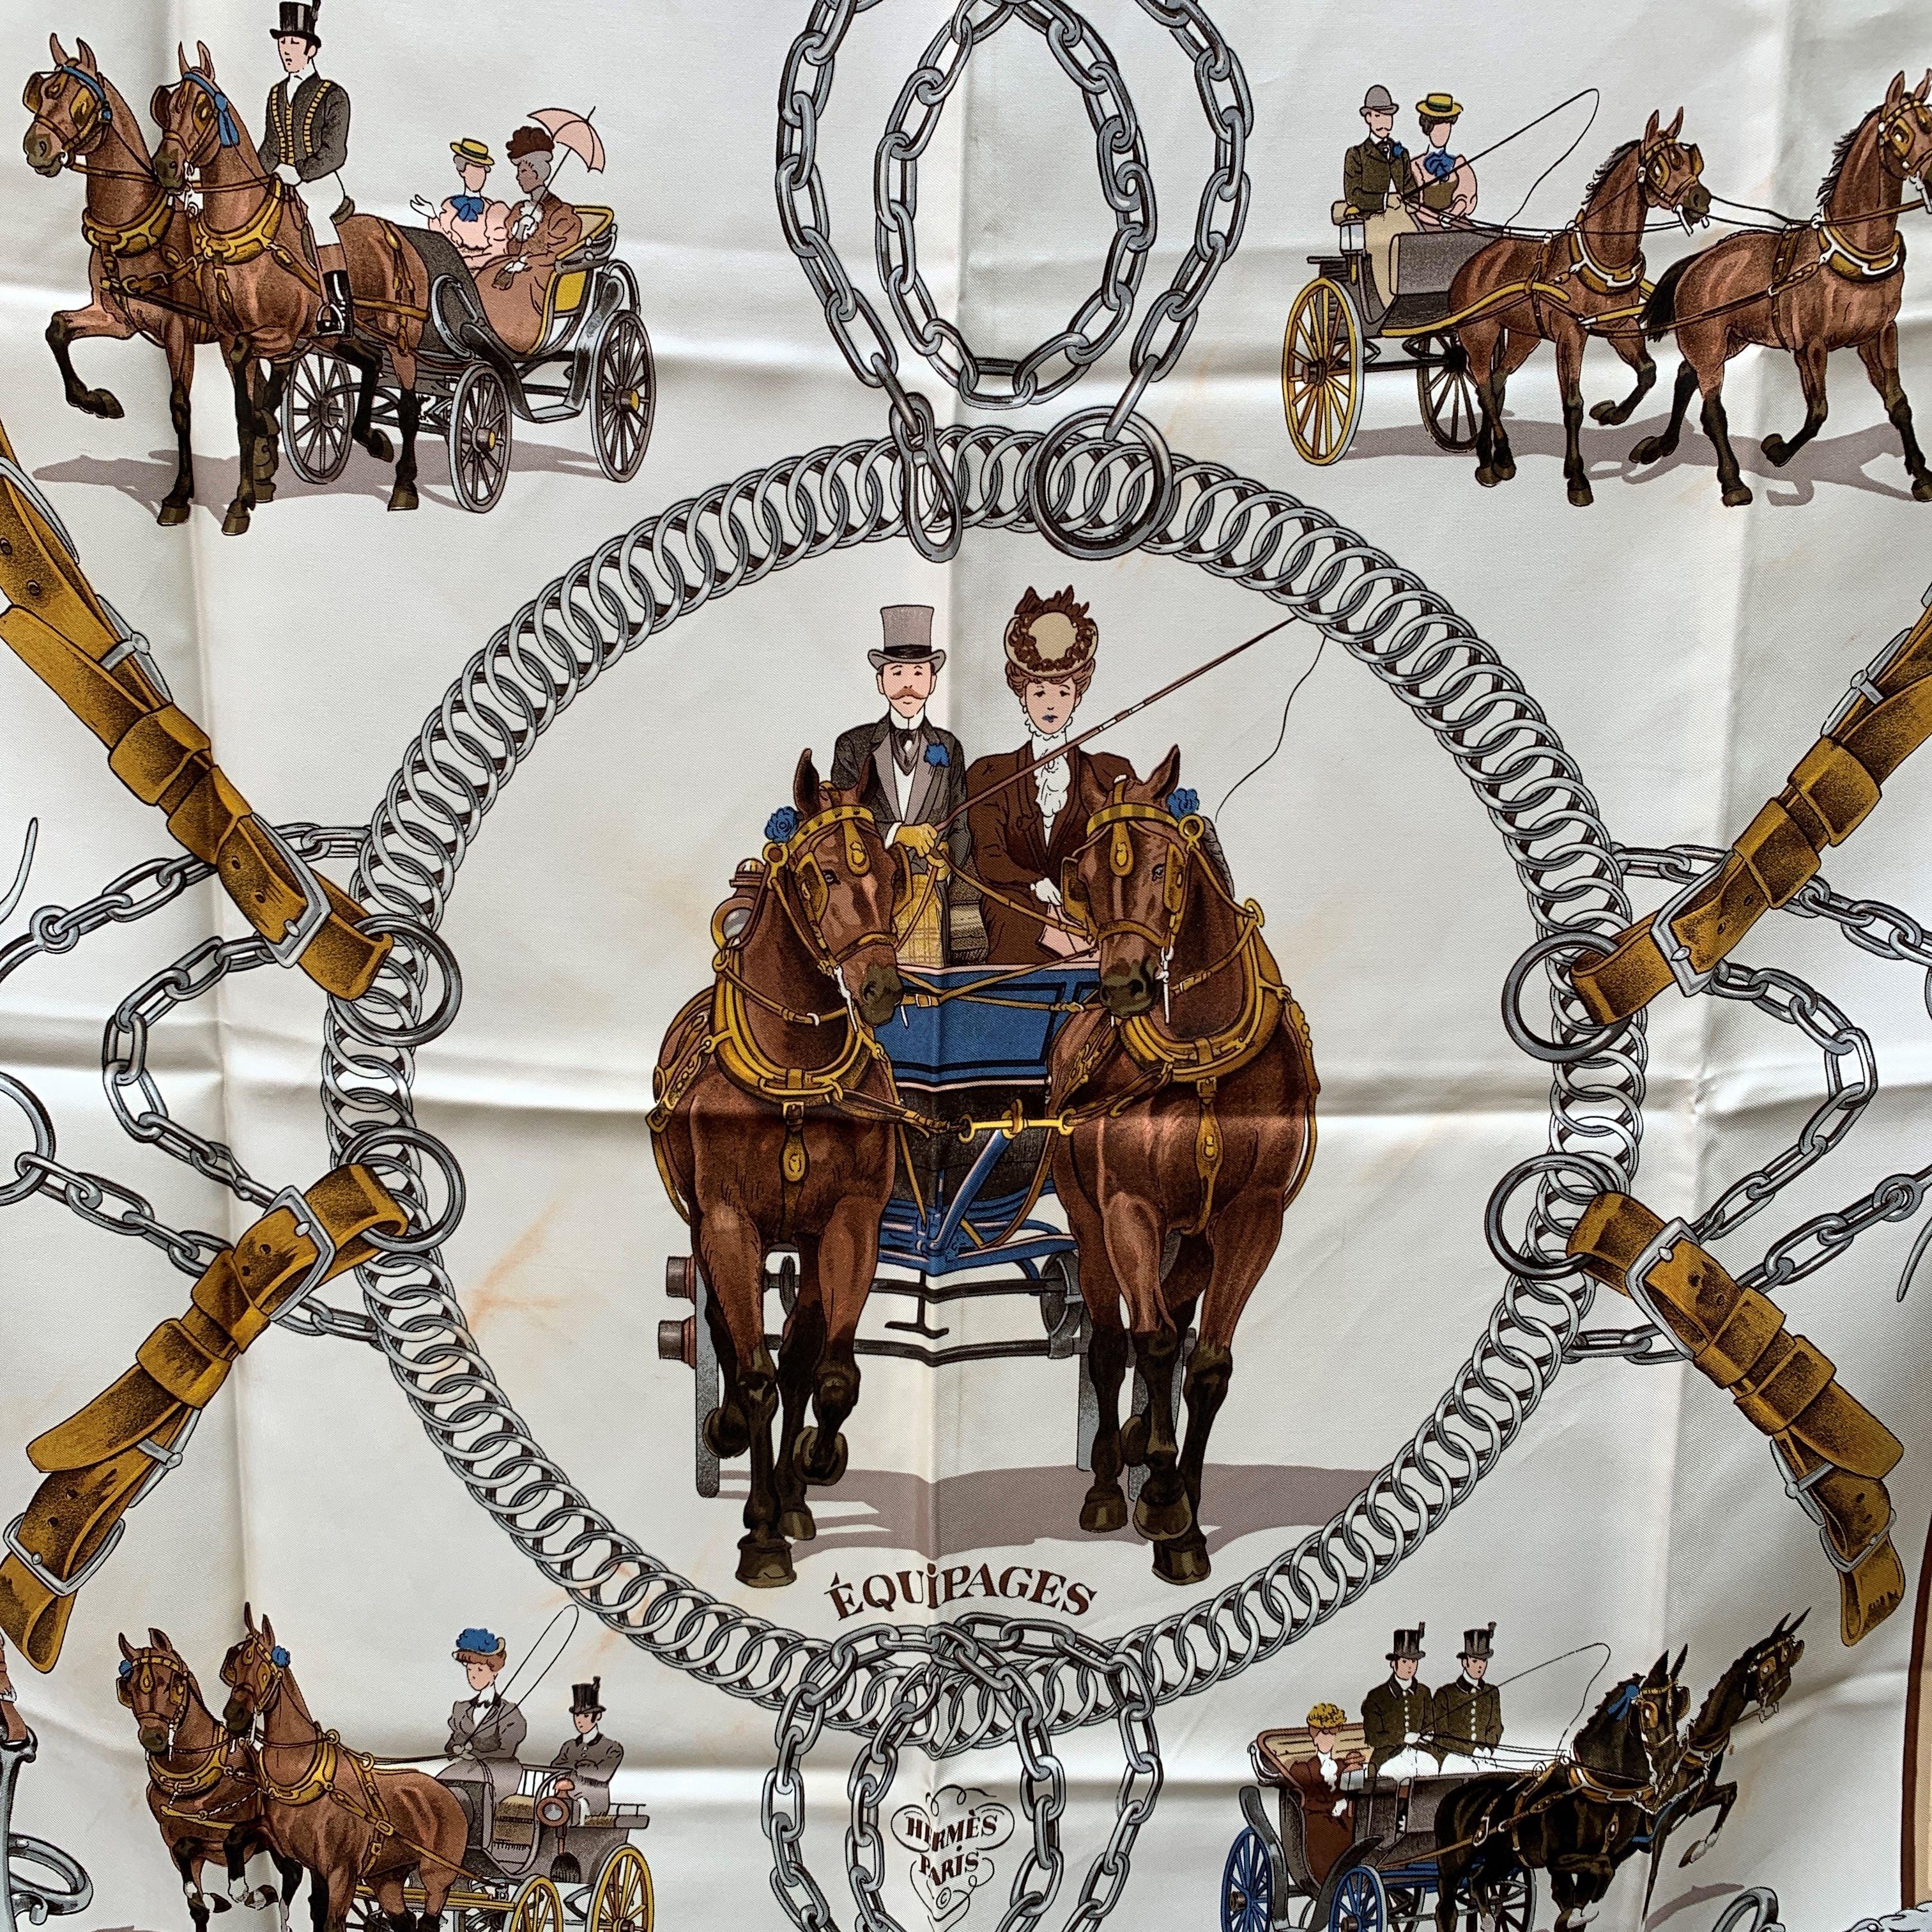 Hermes Paris Vintage Silk Scarf 'Equipages'. It depicts some horse carriage driving scenes. Artist :Philippe Ledoux. First Issue : 1973. Light brown border with hand rolled hem. Fabric / Material: 100% Silk Details MATERIAL: Silk COLOR: Beige MODEL: